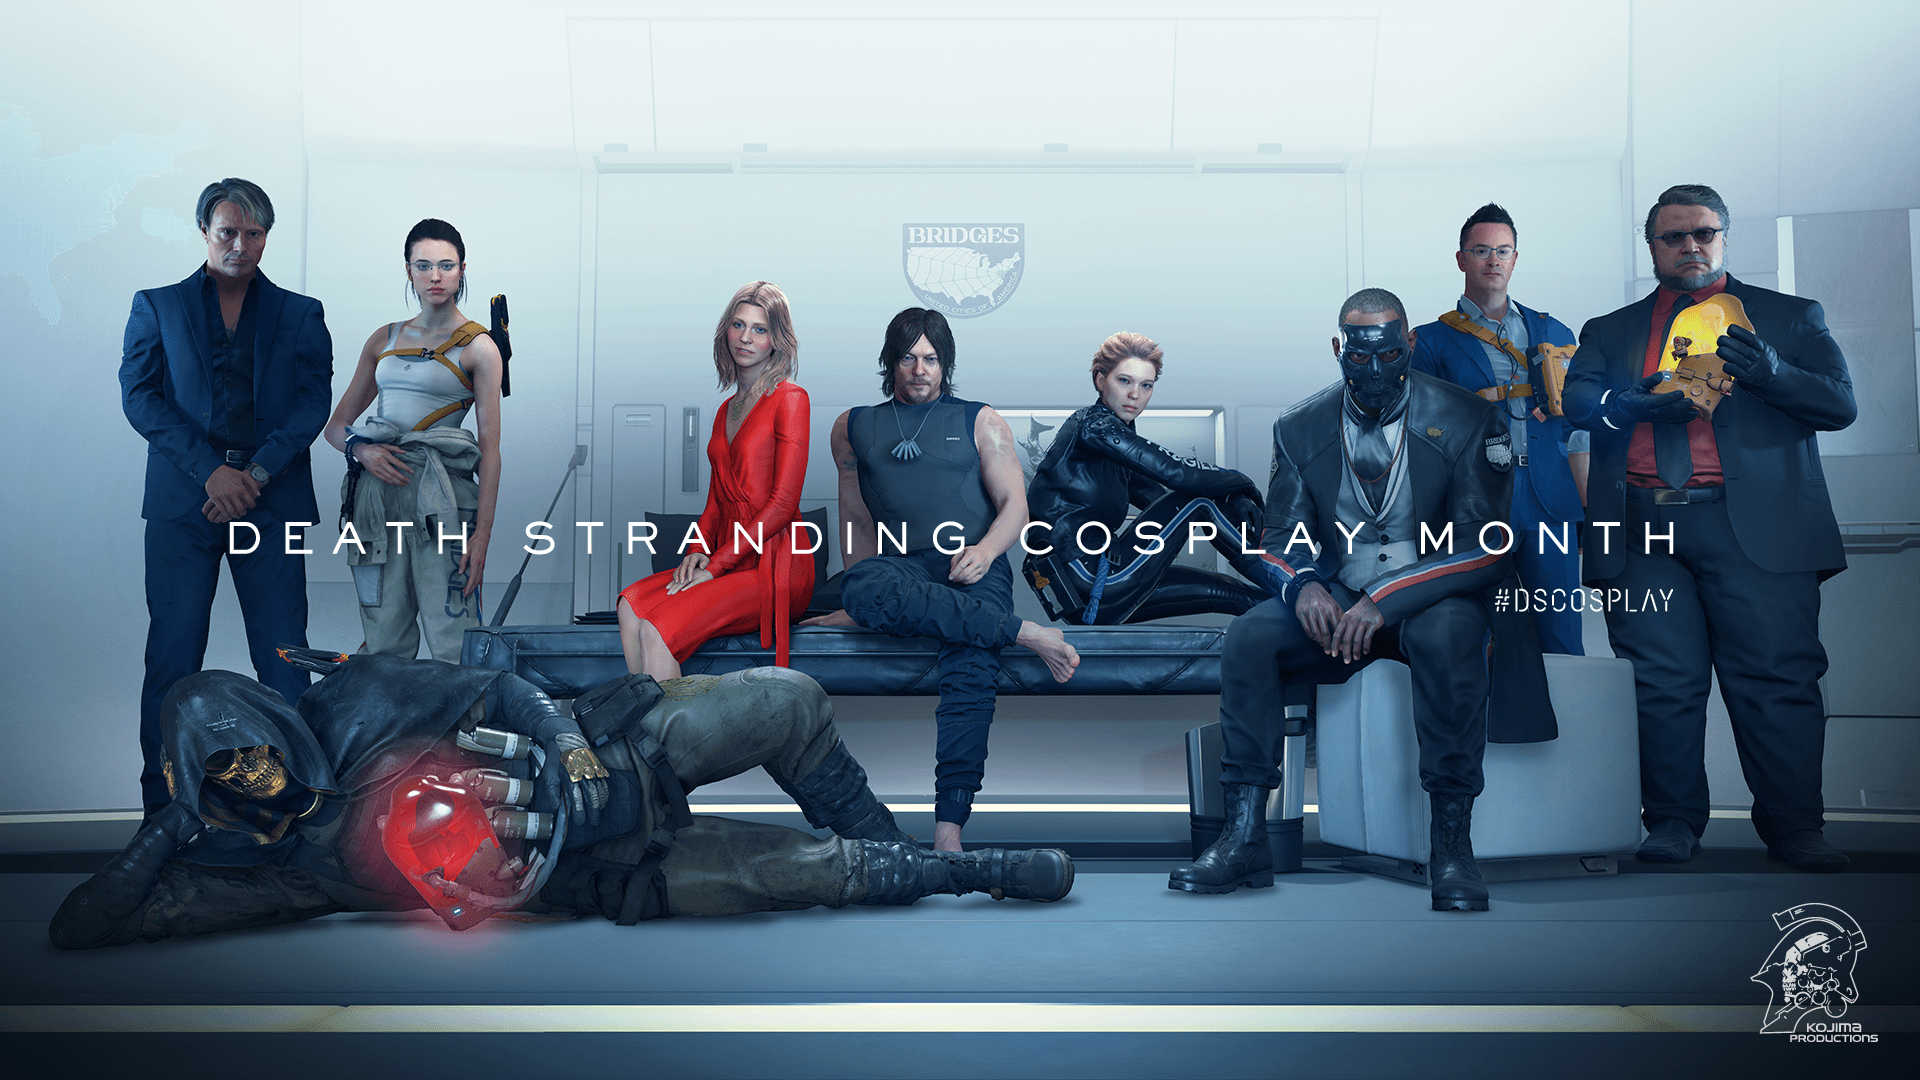 DEATH STRANDING COSPLAY MONTH EVENT